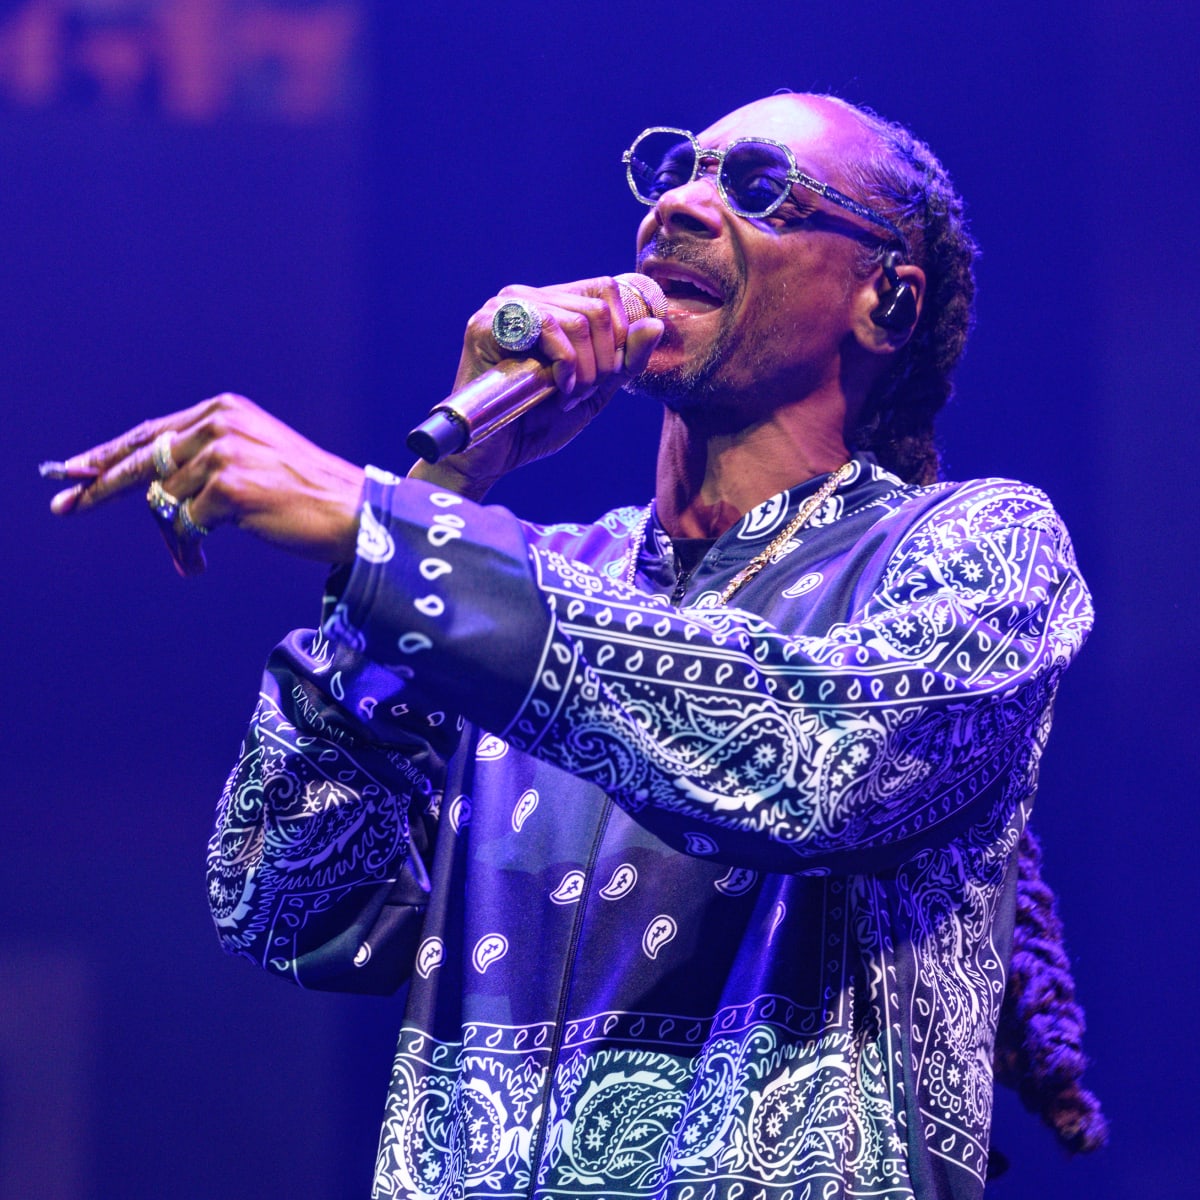 Notorious Stoner Snoop Dogg Announces He's 'Giving Up Smoke' - Men's Journal